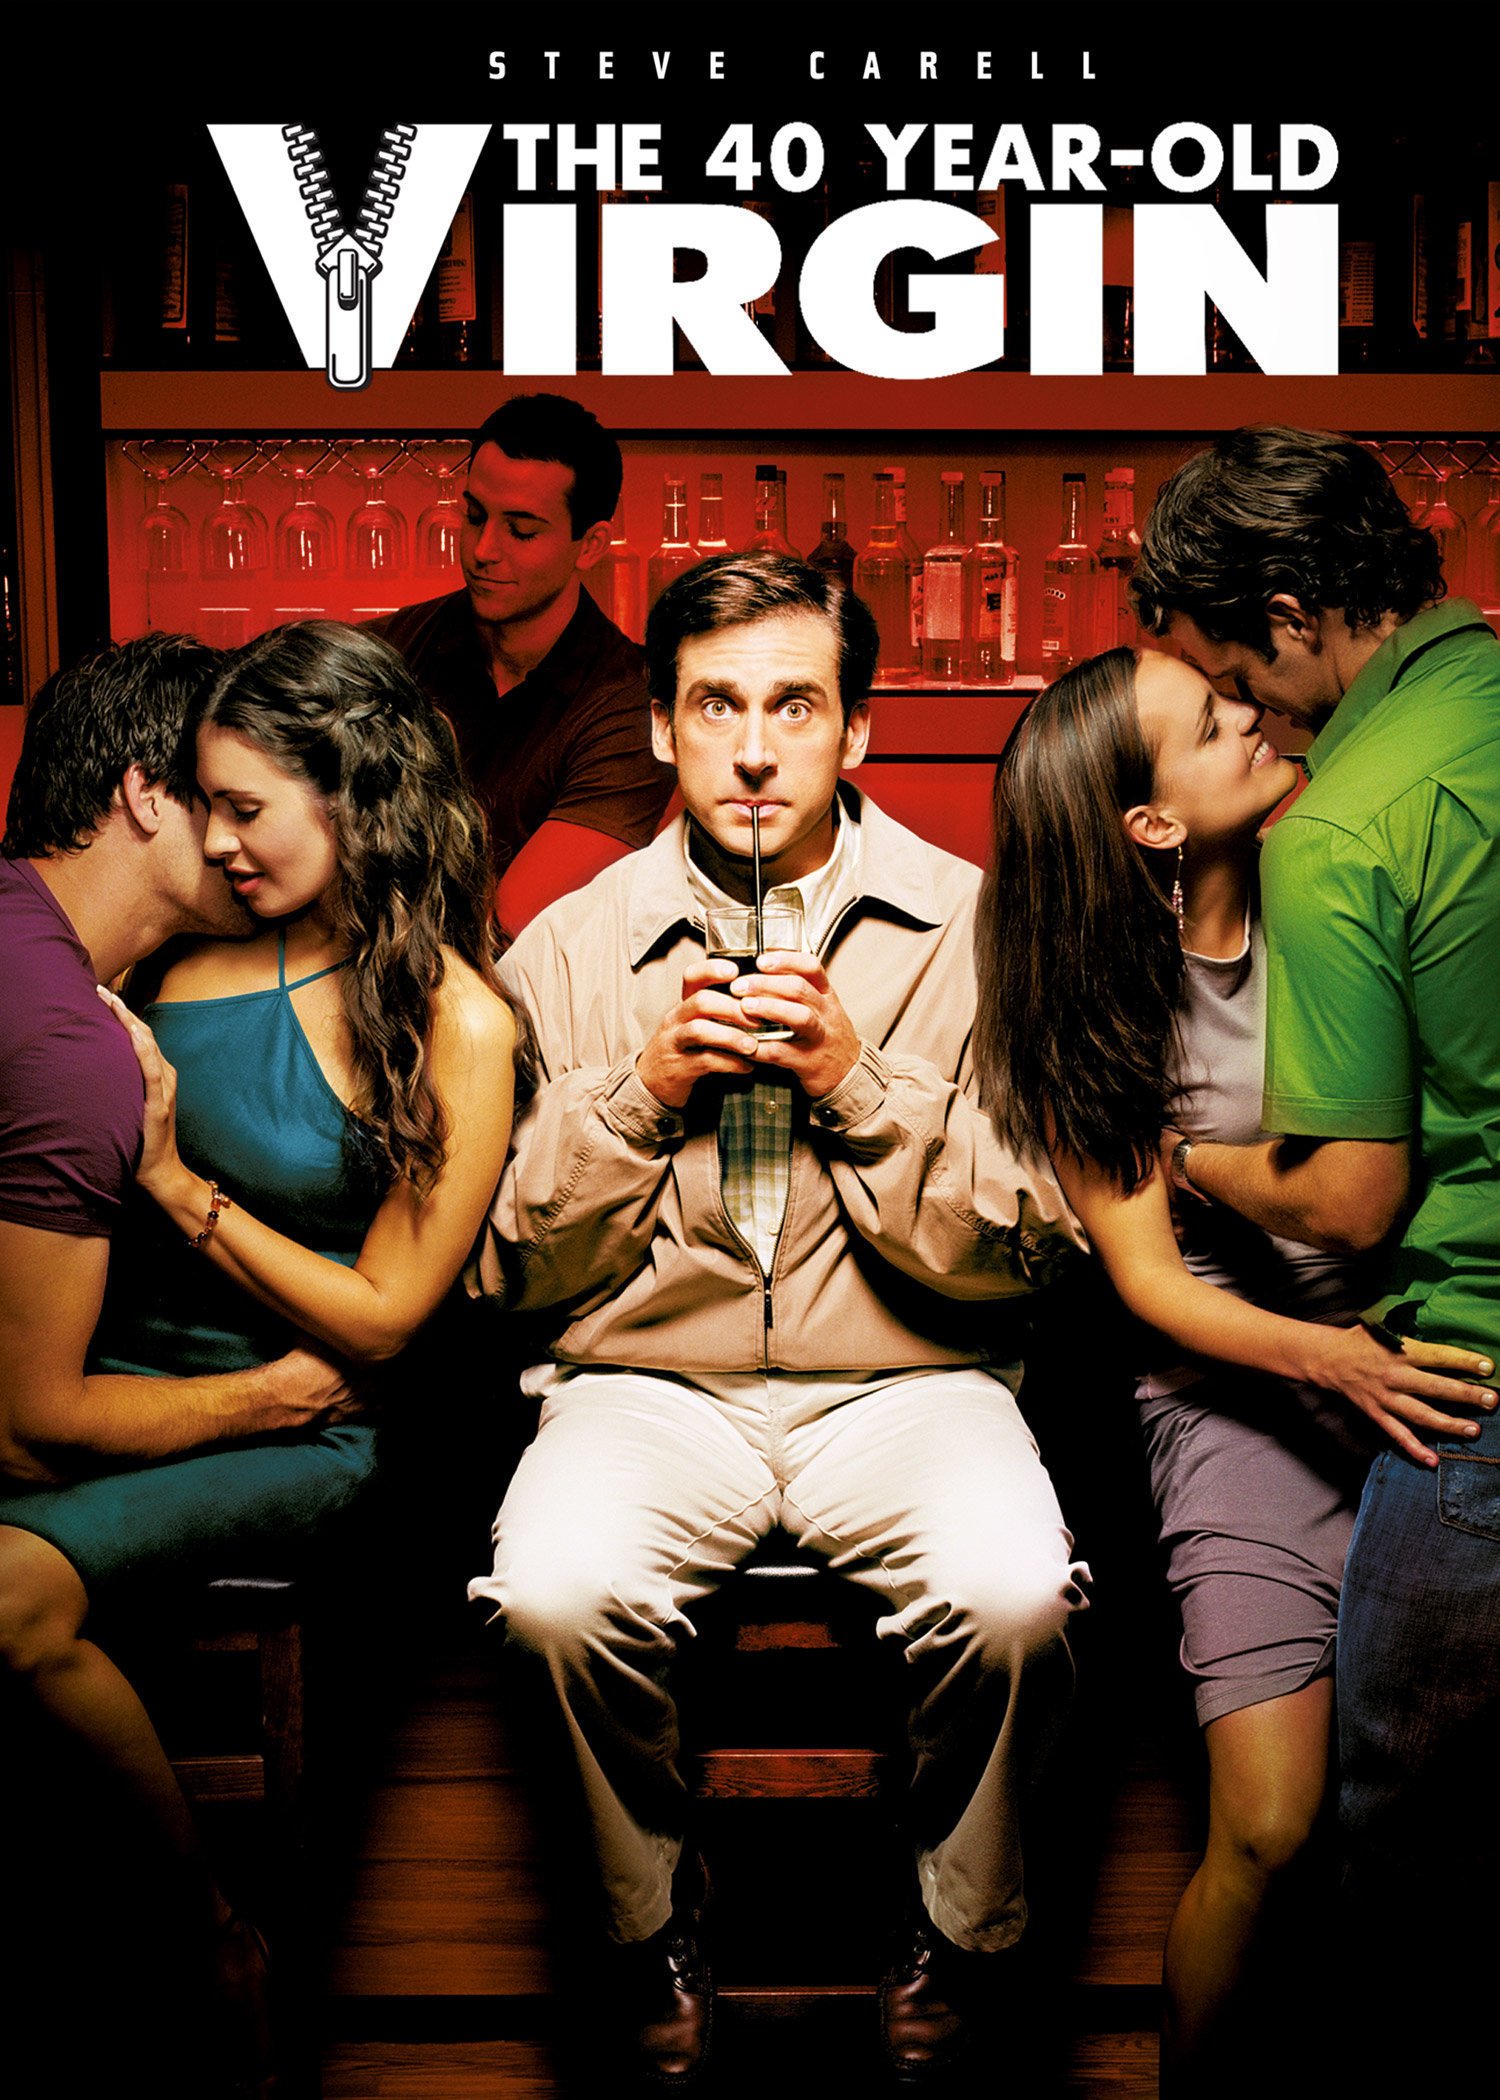 aaron drew recommends 42 year old virgin movie pic